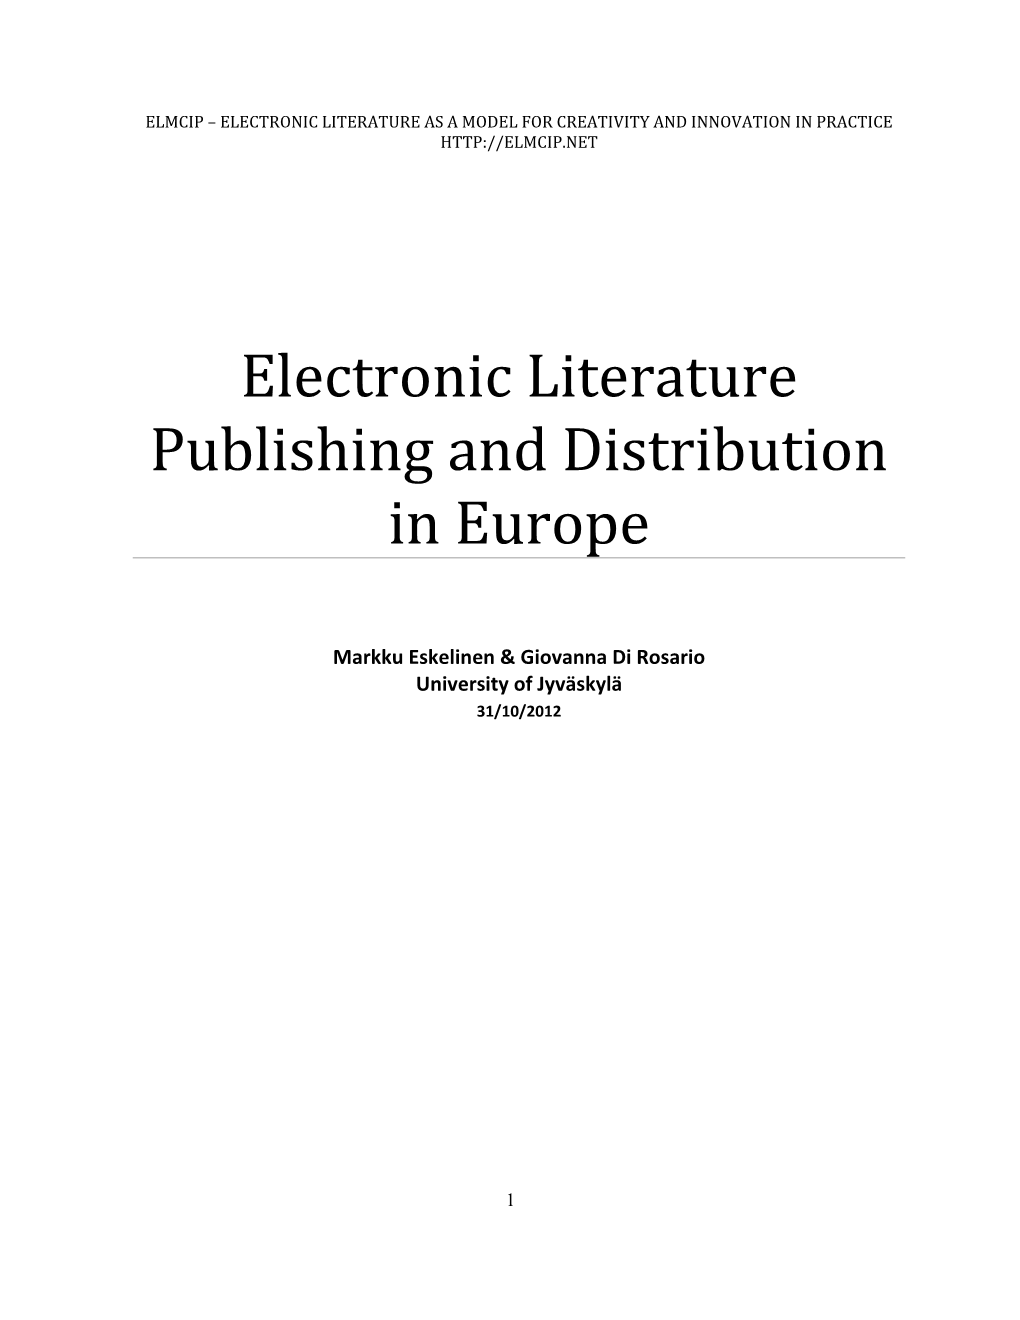 Electronic Literature Publishing and Distribution in Europe